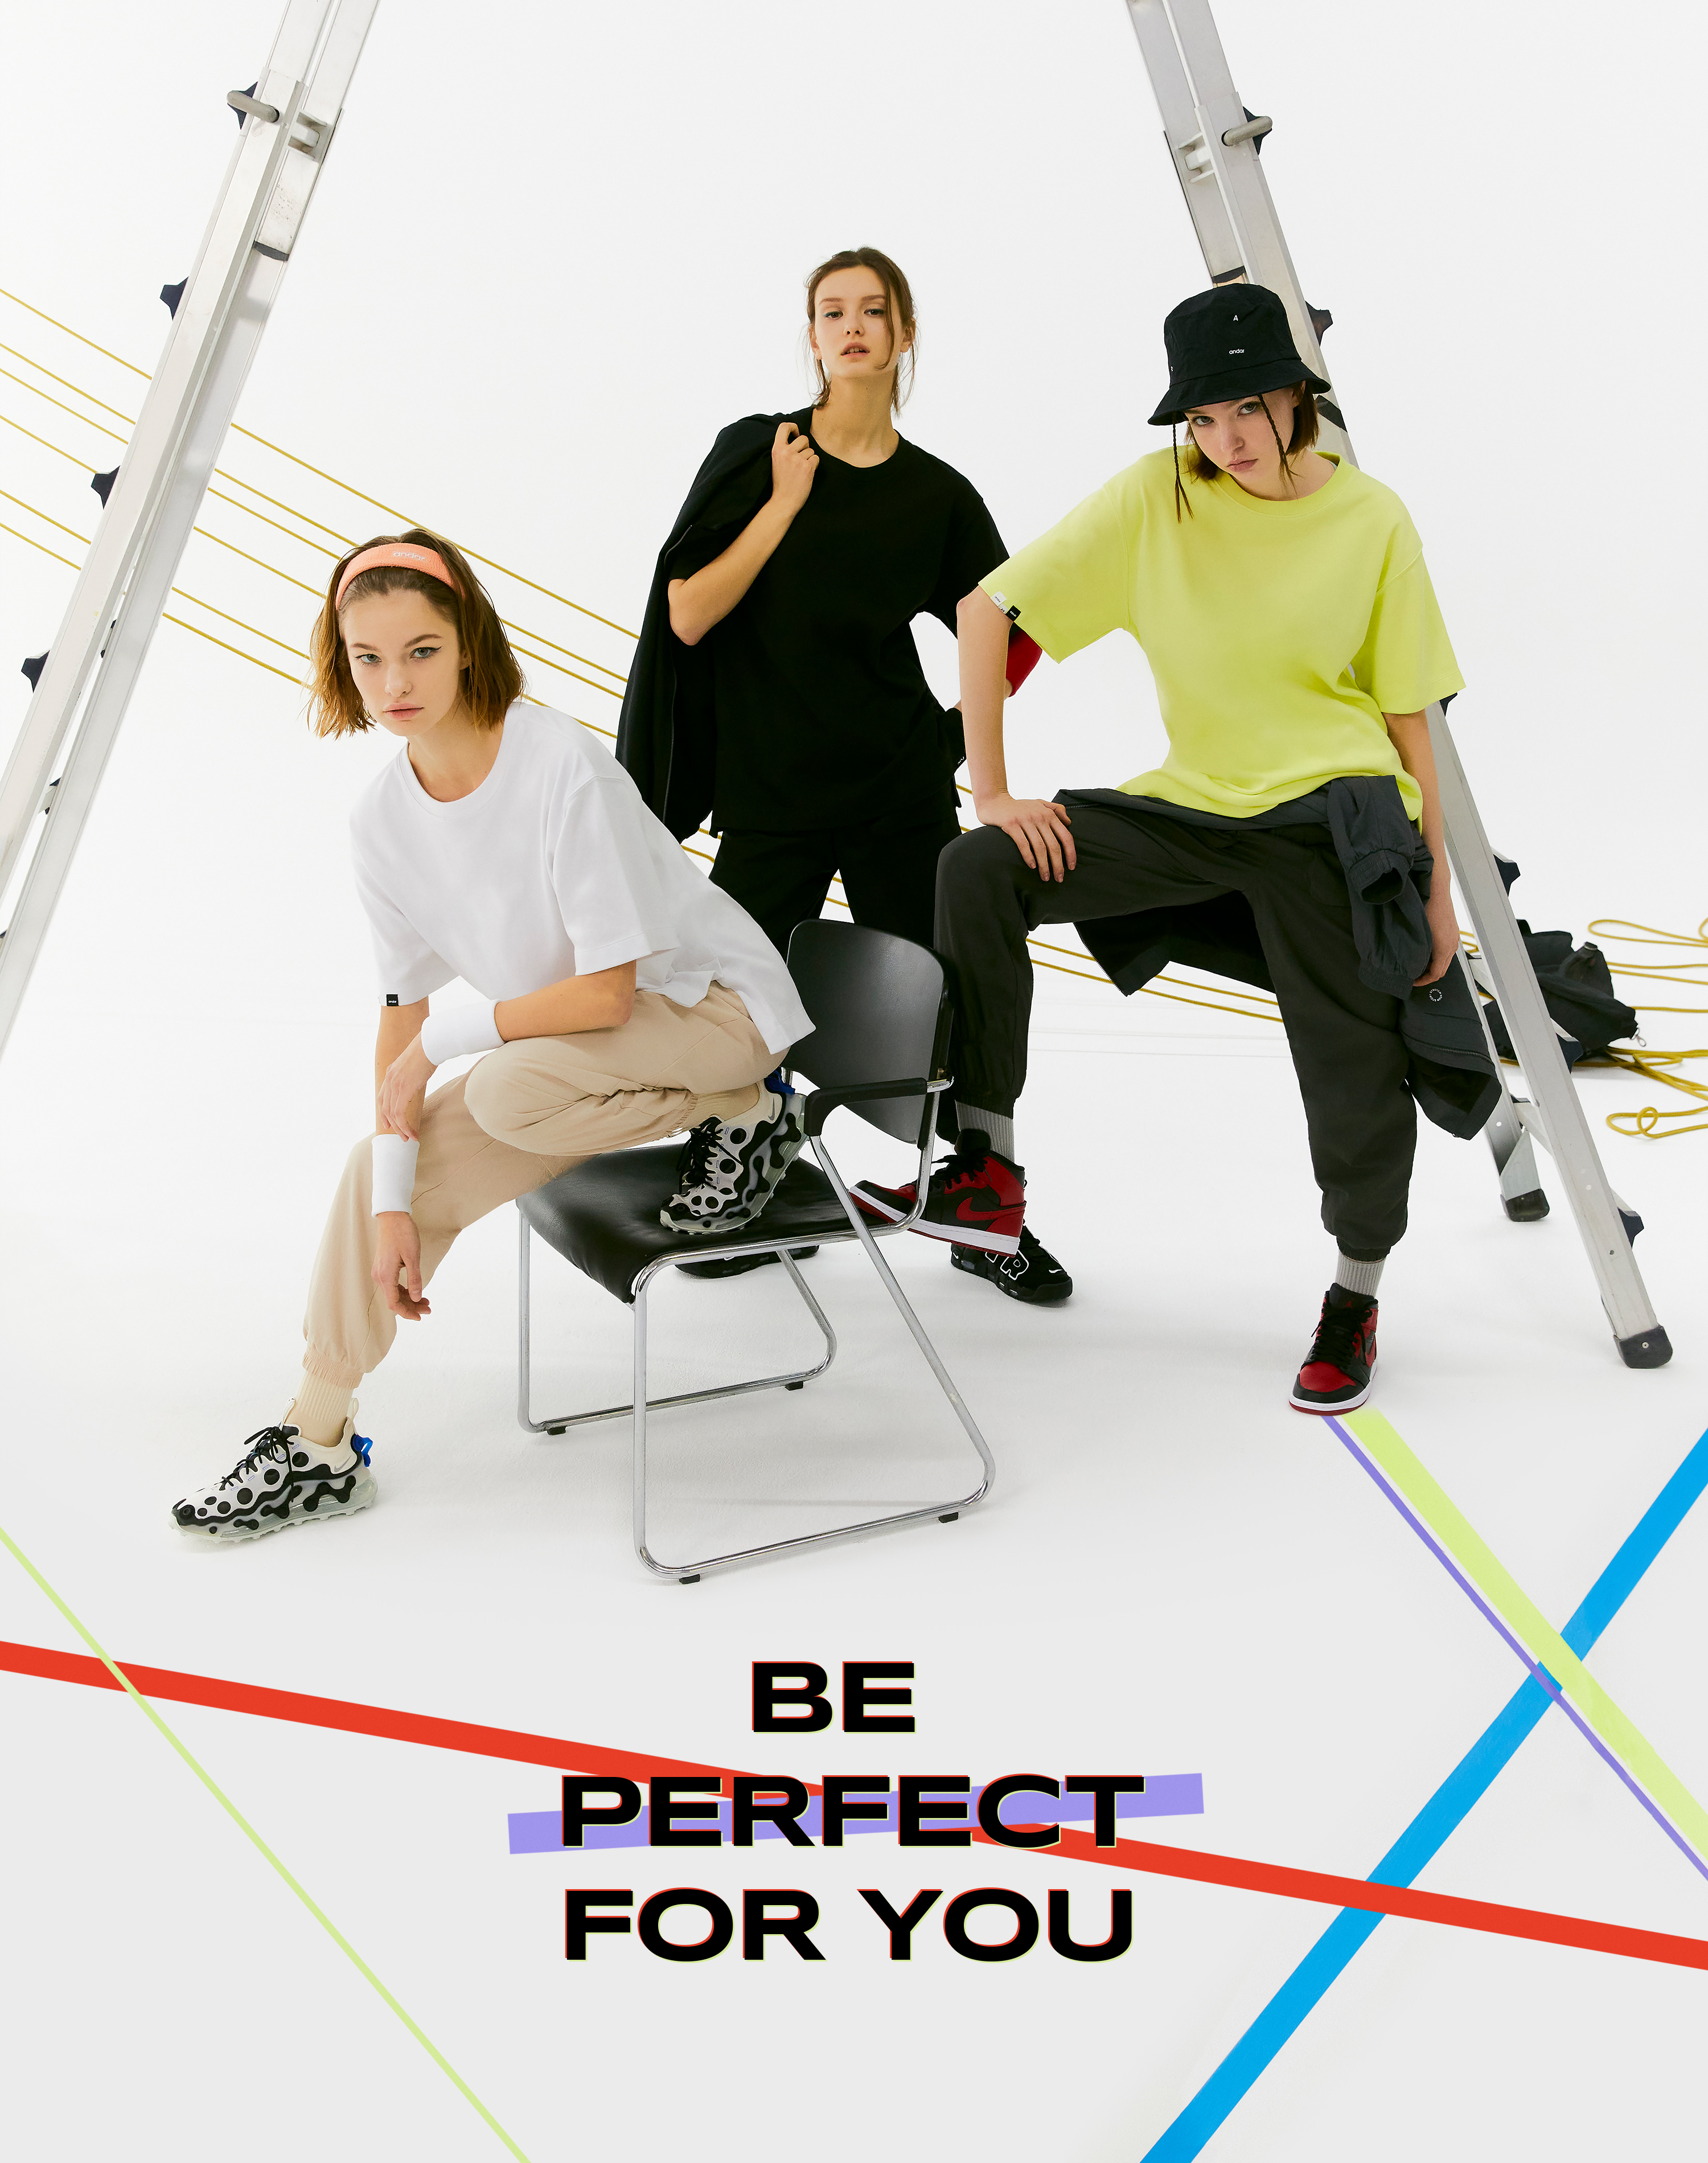 BE PERFECT FOR YOU